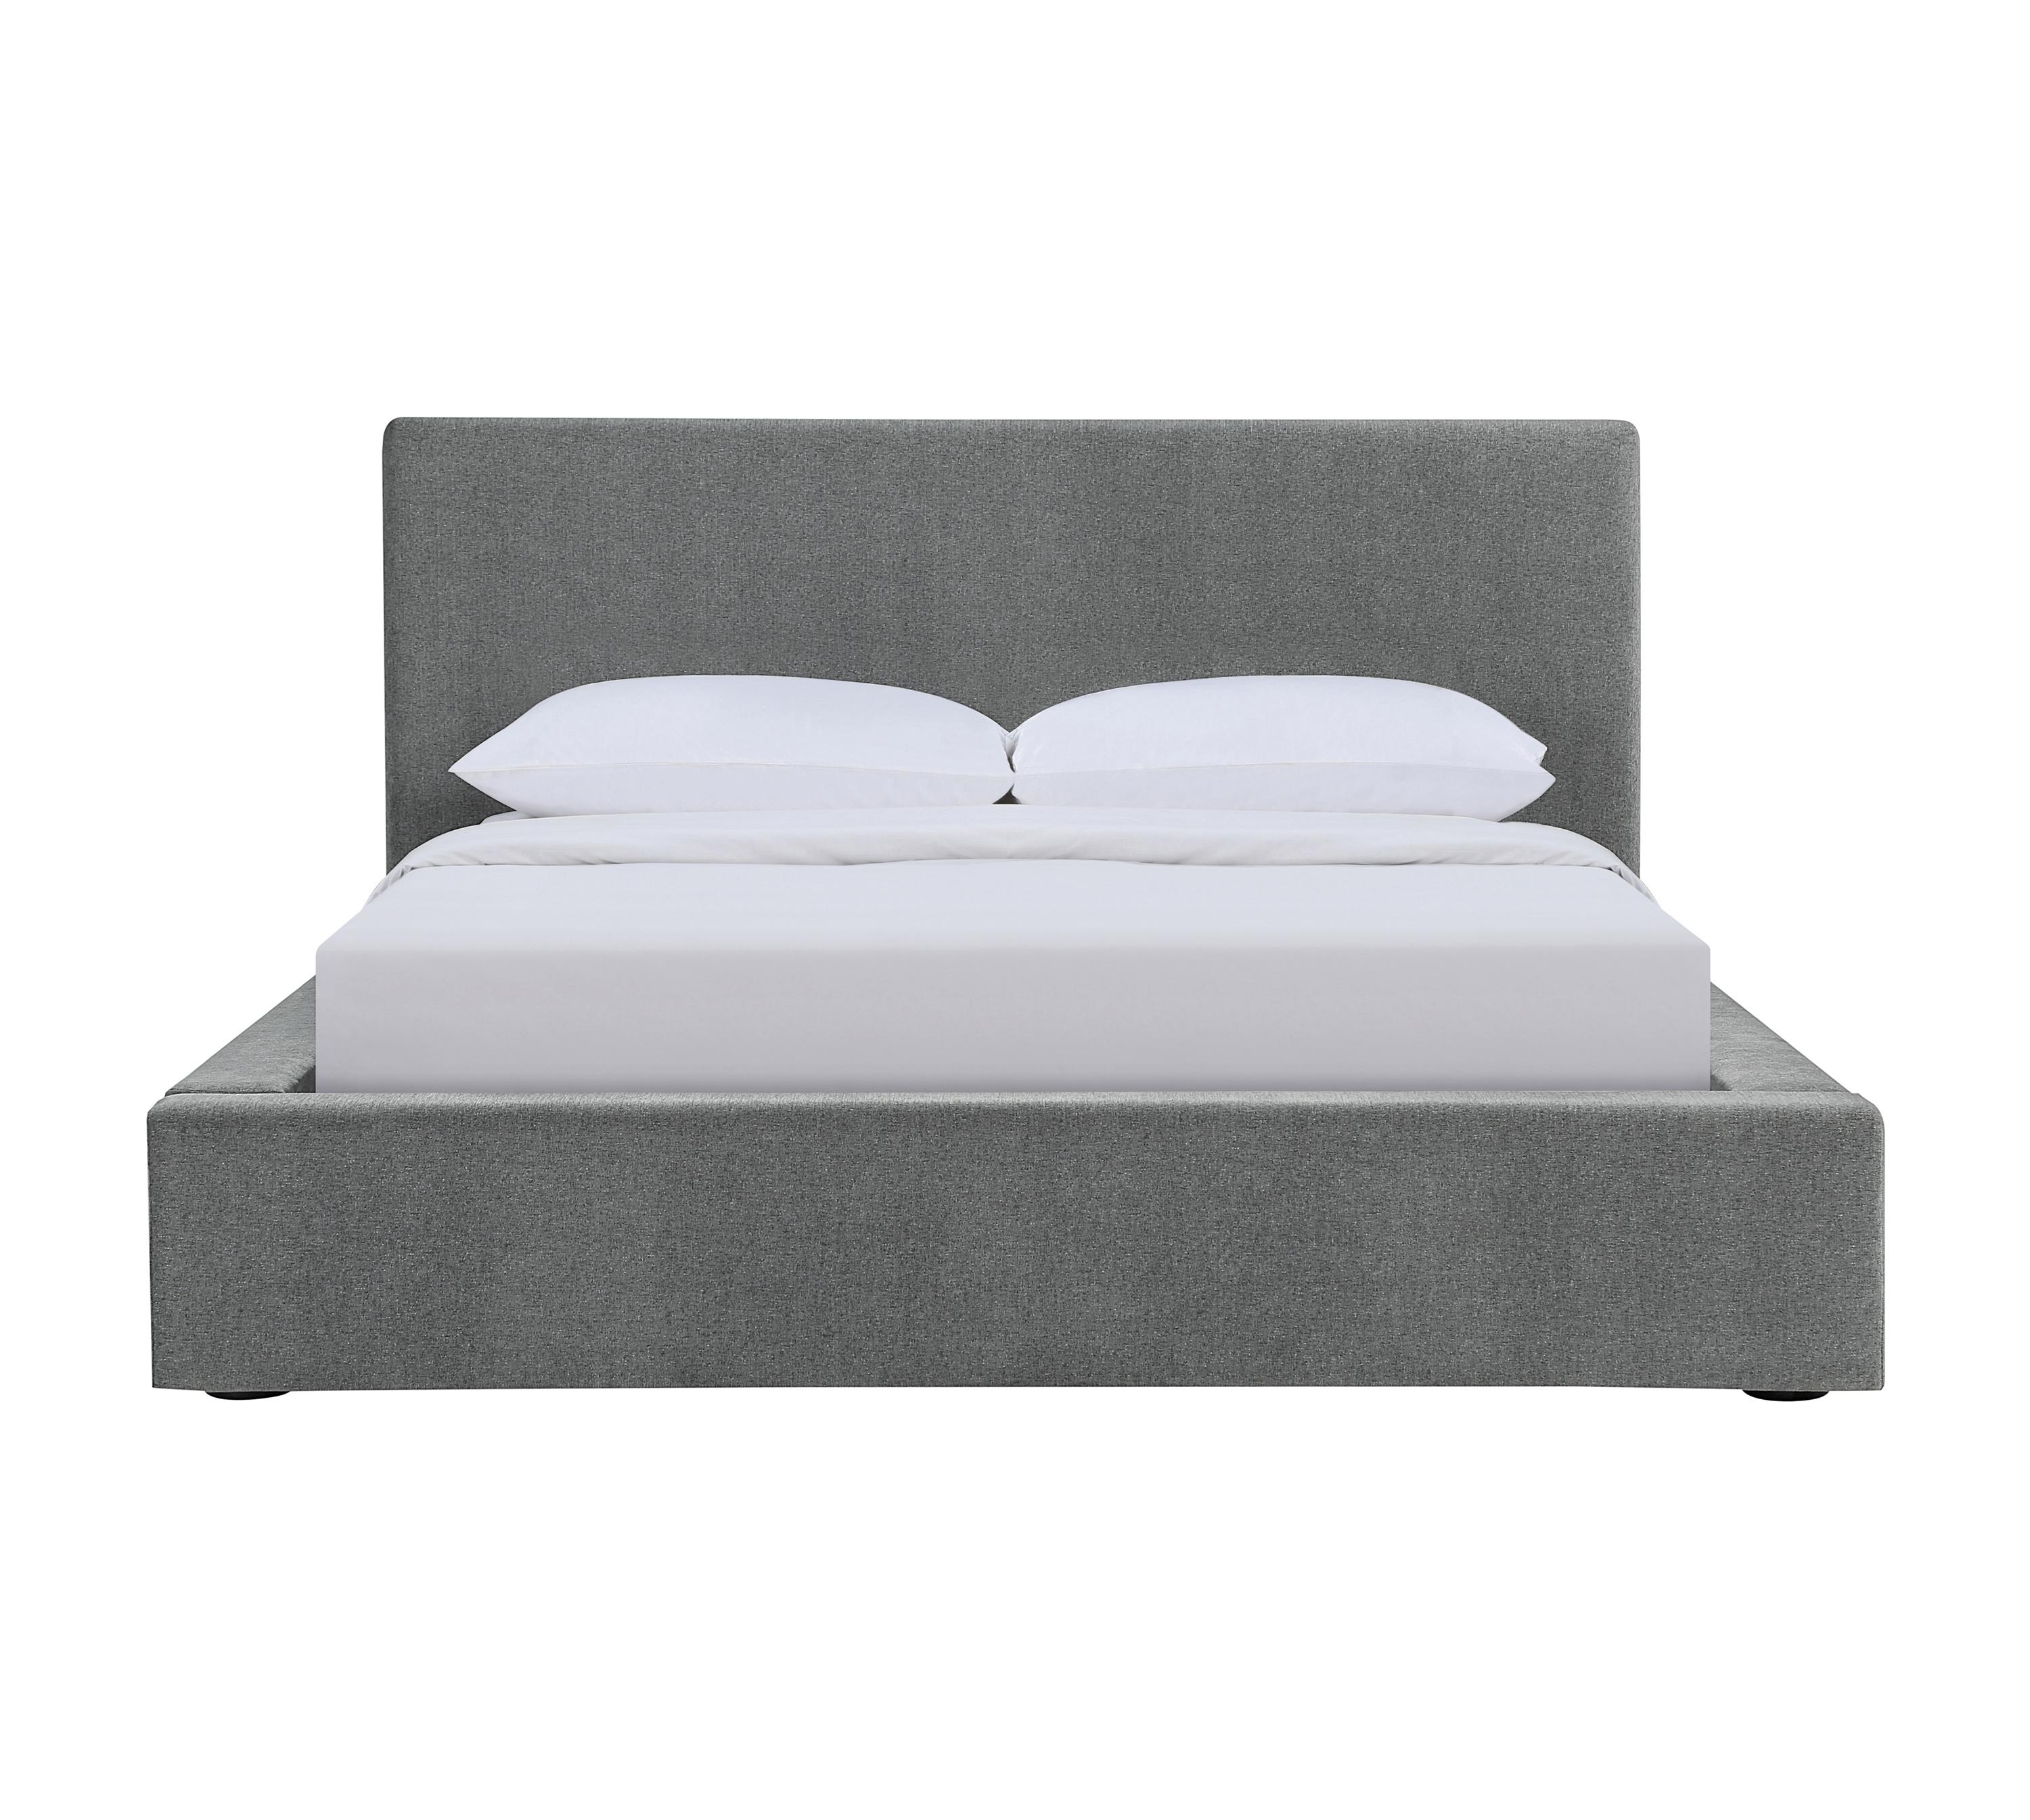 Modern Bed 316020F Gregory 316020F in Graphite 